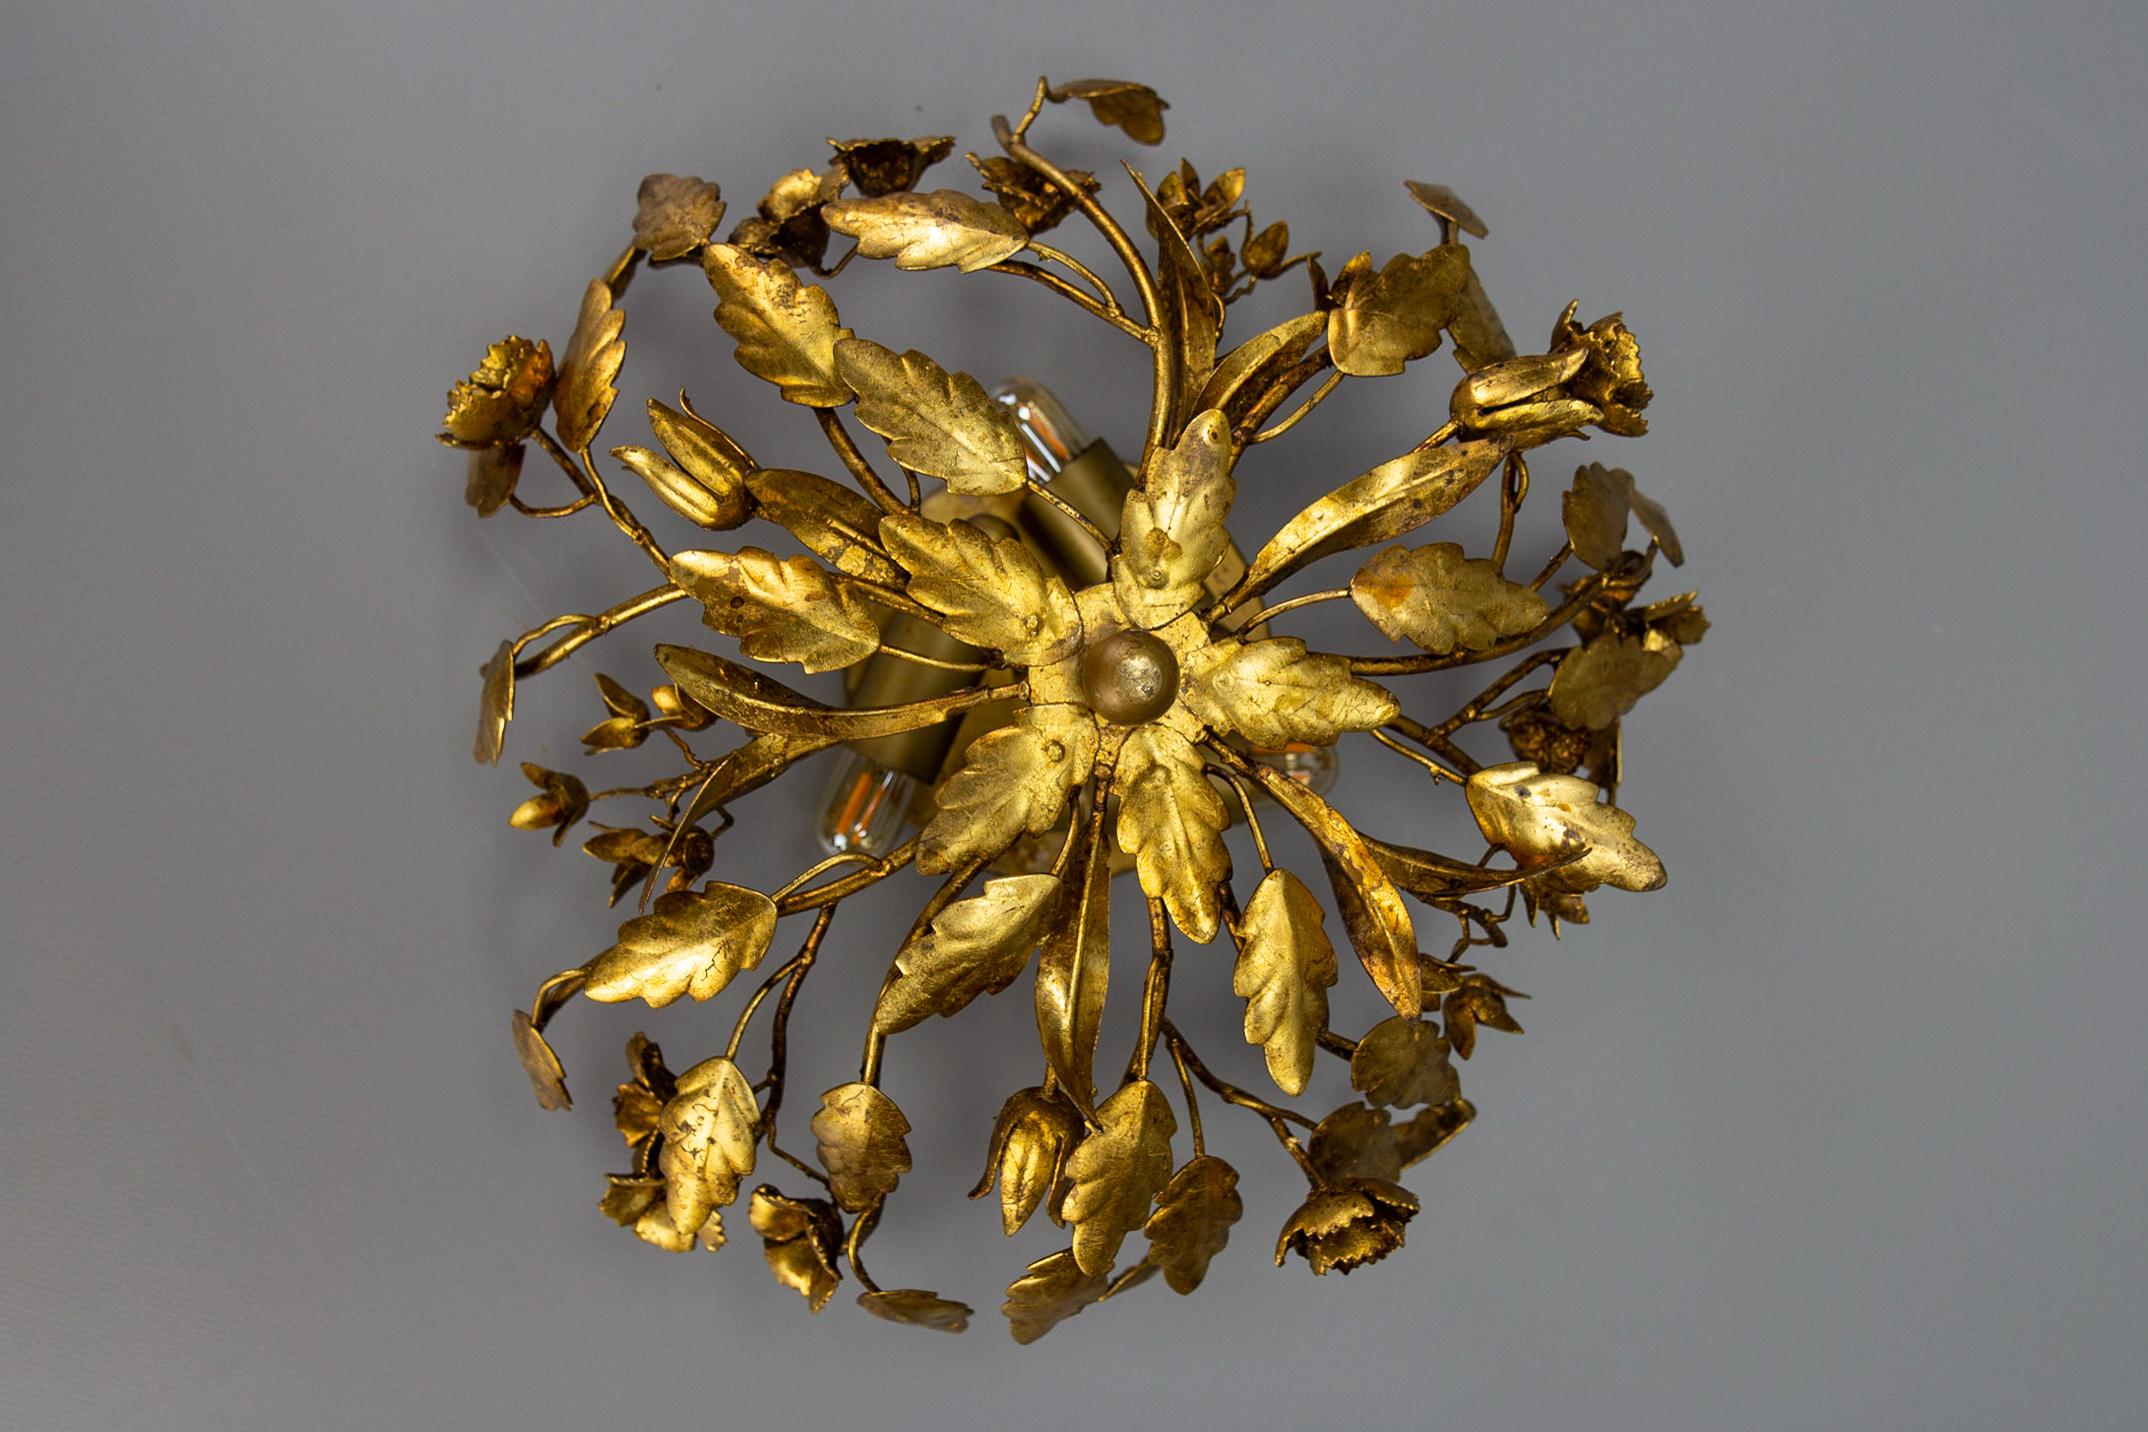 Hollywood Regency style gilt metal floral flush mount or ceiling light, Germany, circa the 1970s.
This adorable Hollywood Regency-style gilt metal floral flush mount or ceiling light is adorned with beautifully shaped leaves and flowers.
Three